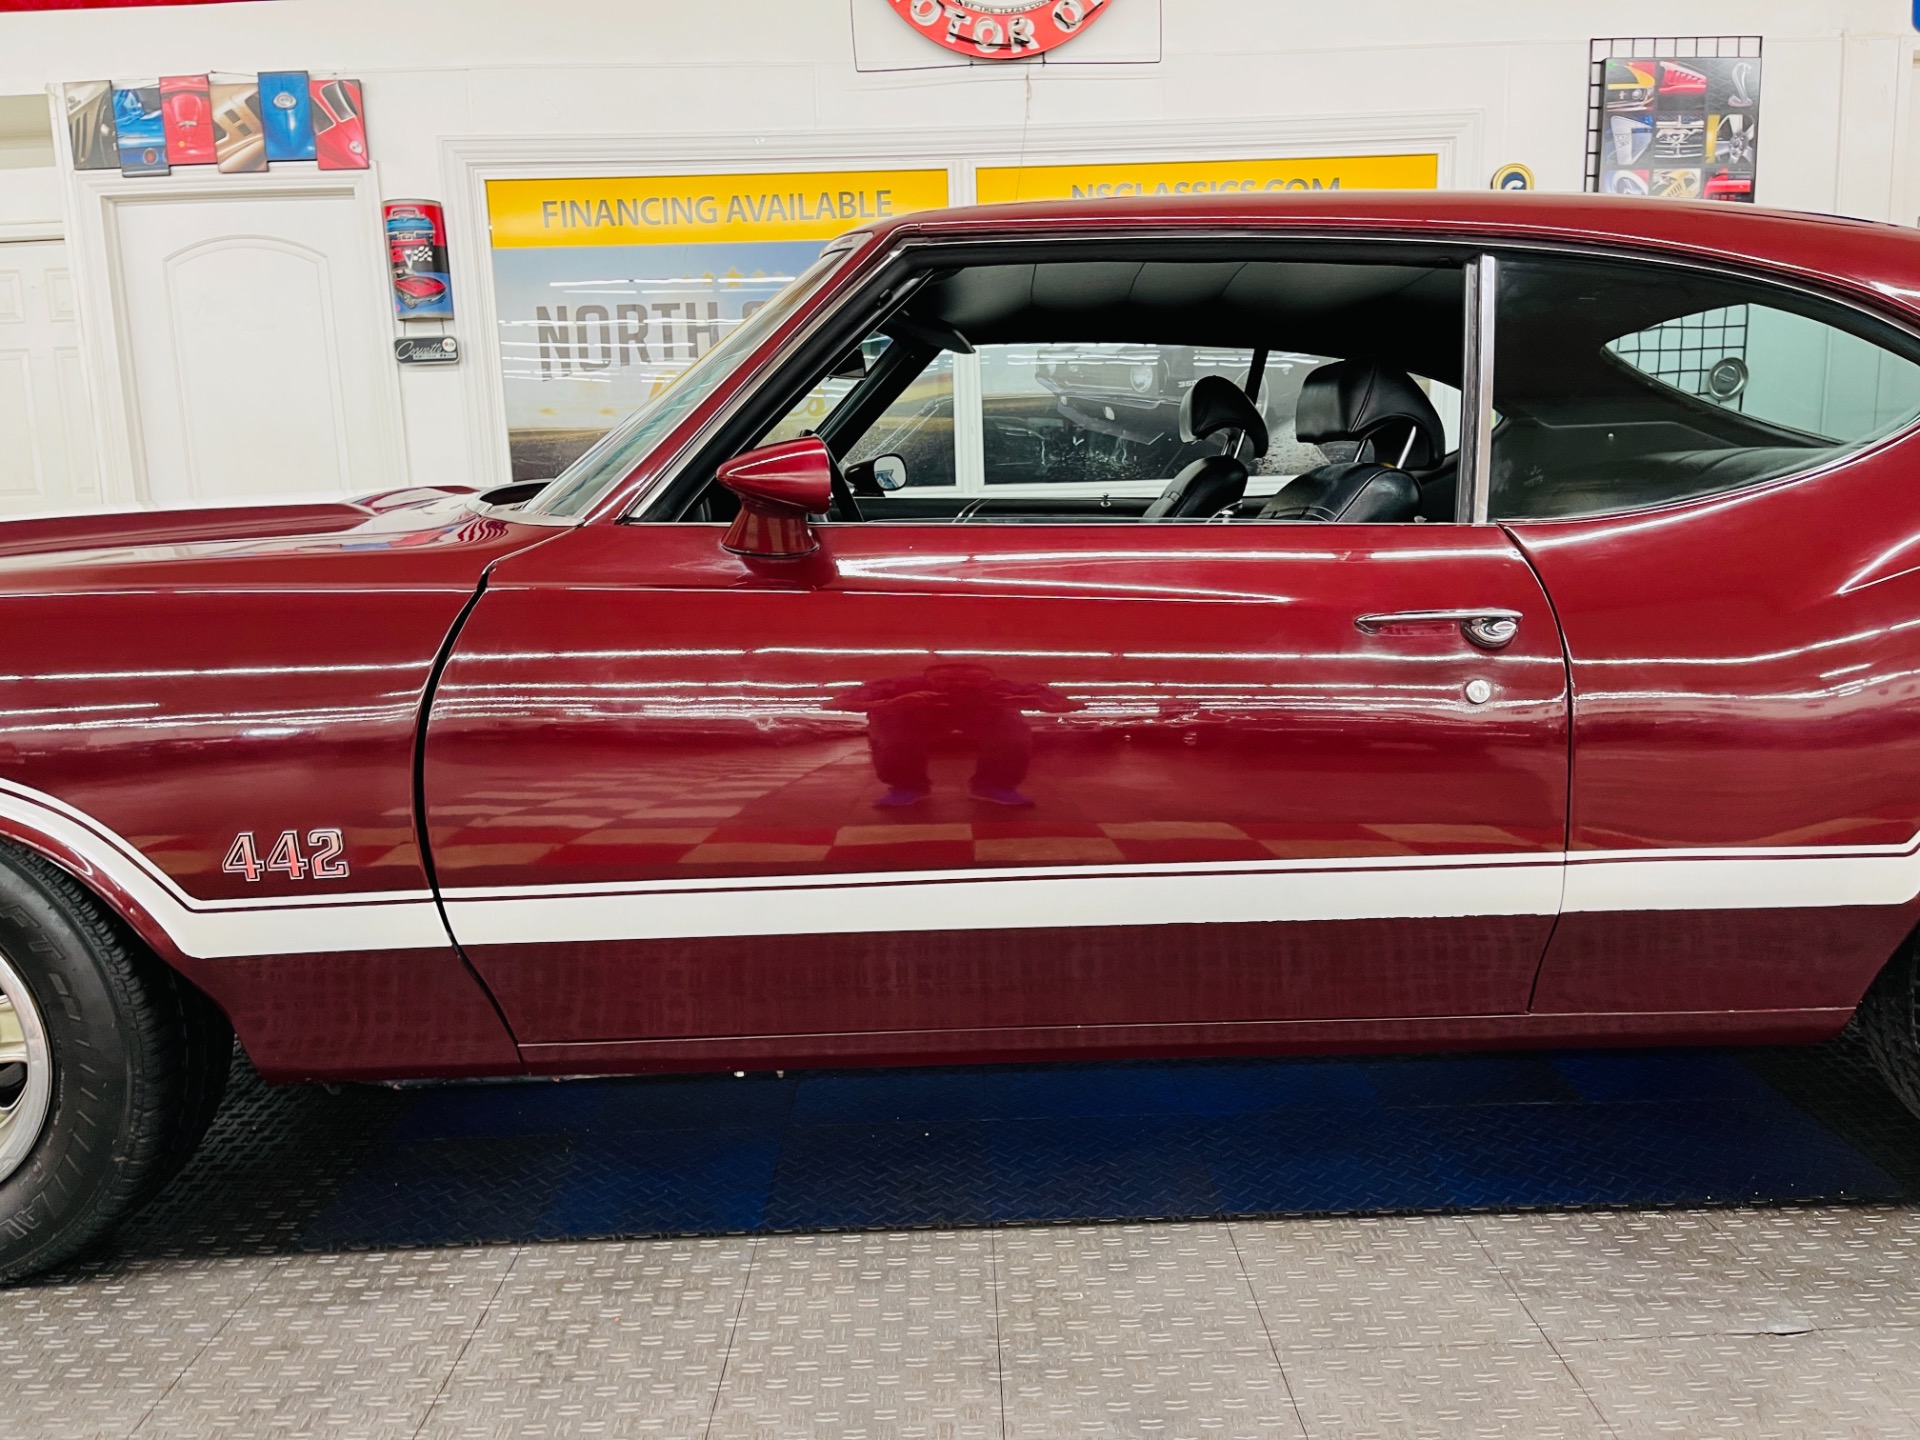 Used 1972 Oldsmobile 442 - GREAT DRIVING MUSCLE CAR - SEE VIDEO | Mundelein, IL